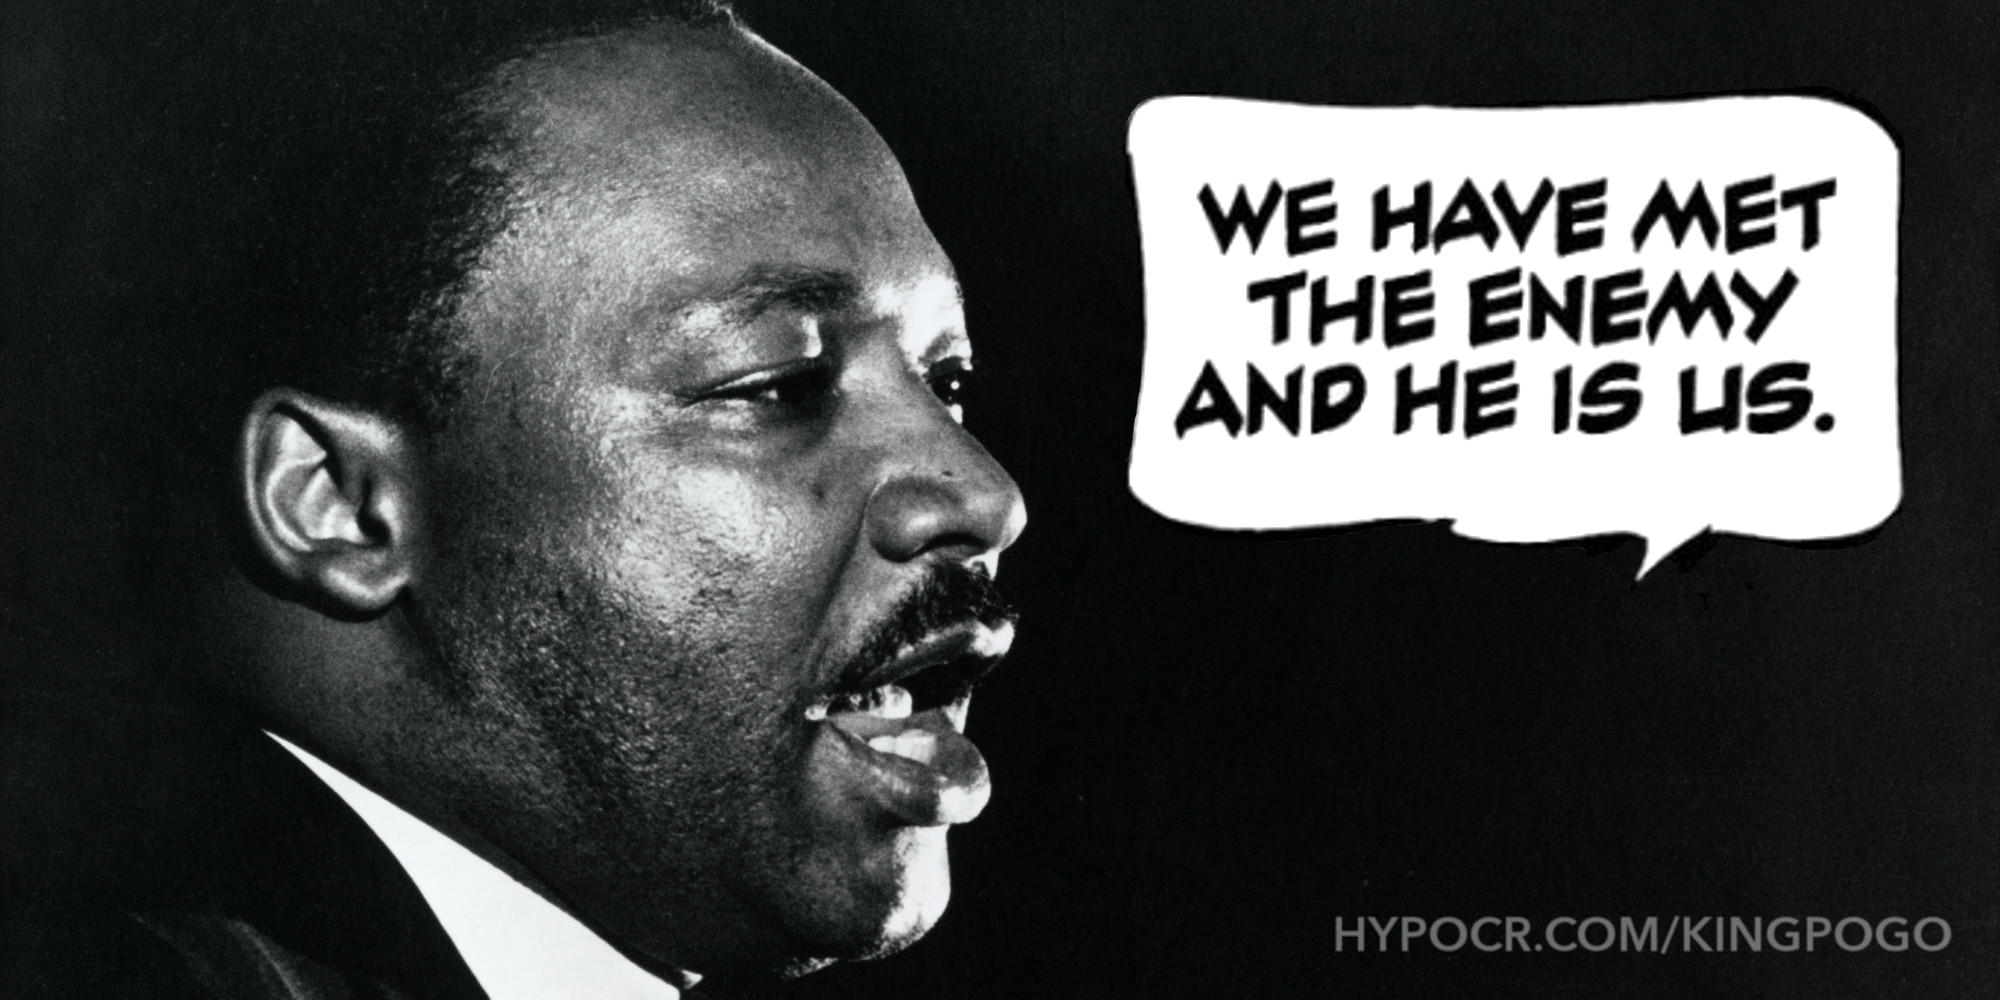 King Pogo: Martin Luther King, Jr. “We have met the enemy and he is us.”; the left; left-wing; Martin Luther King, Jr.; Pogo